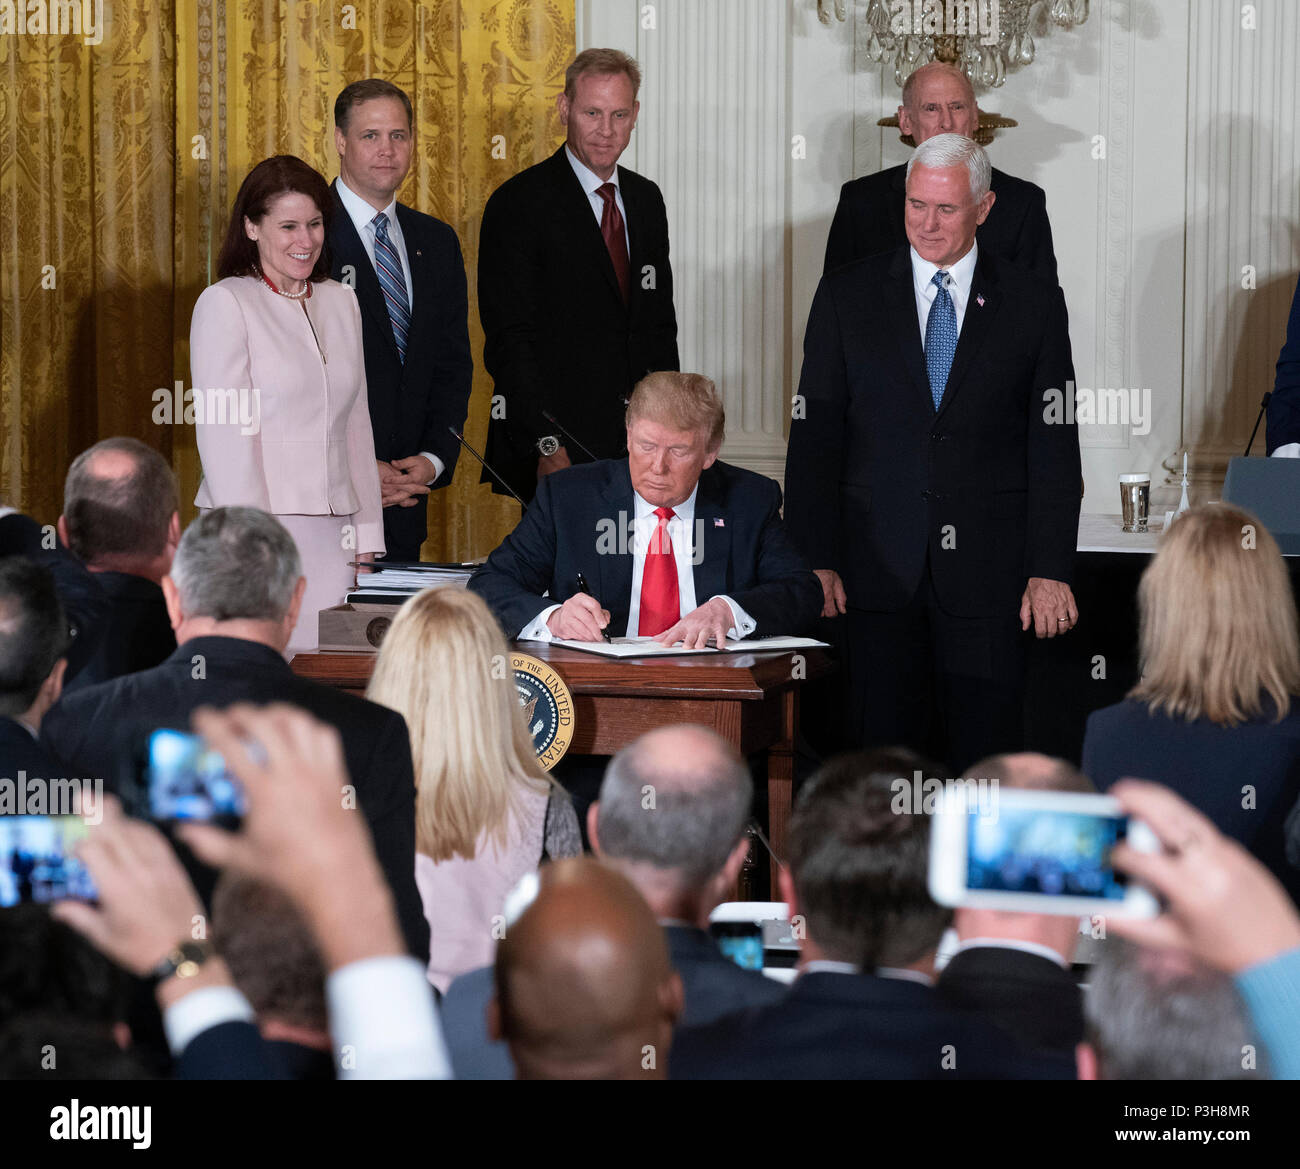 United States President Donald J. Trump signs Space Policy Directive 3 during a meeting of the National Space Council at The White House in Washington, DC, June 18, 2018. The directive addresses issues including monitoring of objects in orbit, providing that information to spacecraft operators to avoid collisions, and to limit the growth of orbital debris. Chris Kleponis/CNP /MediaPunch Stock Photo